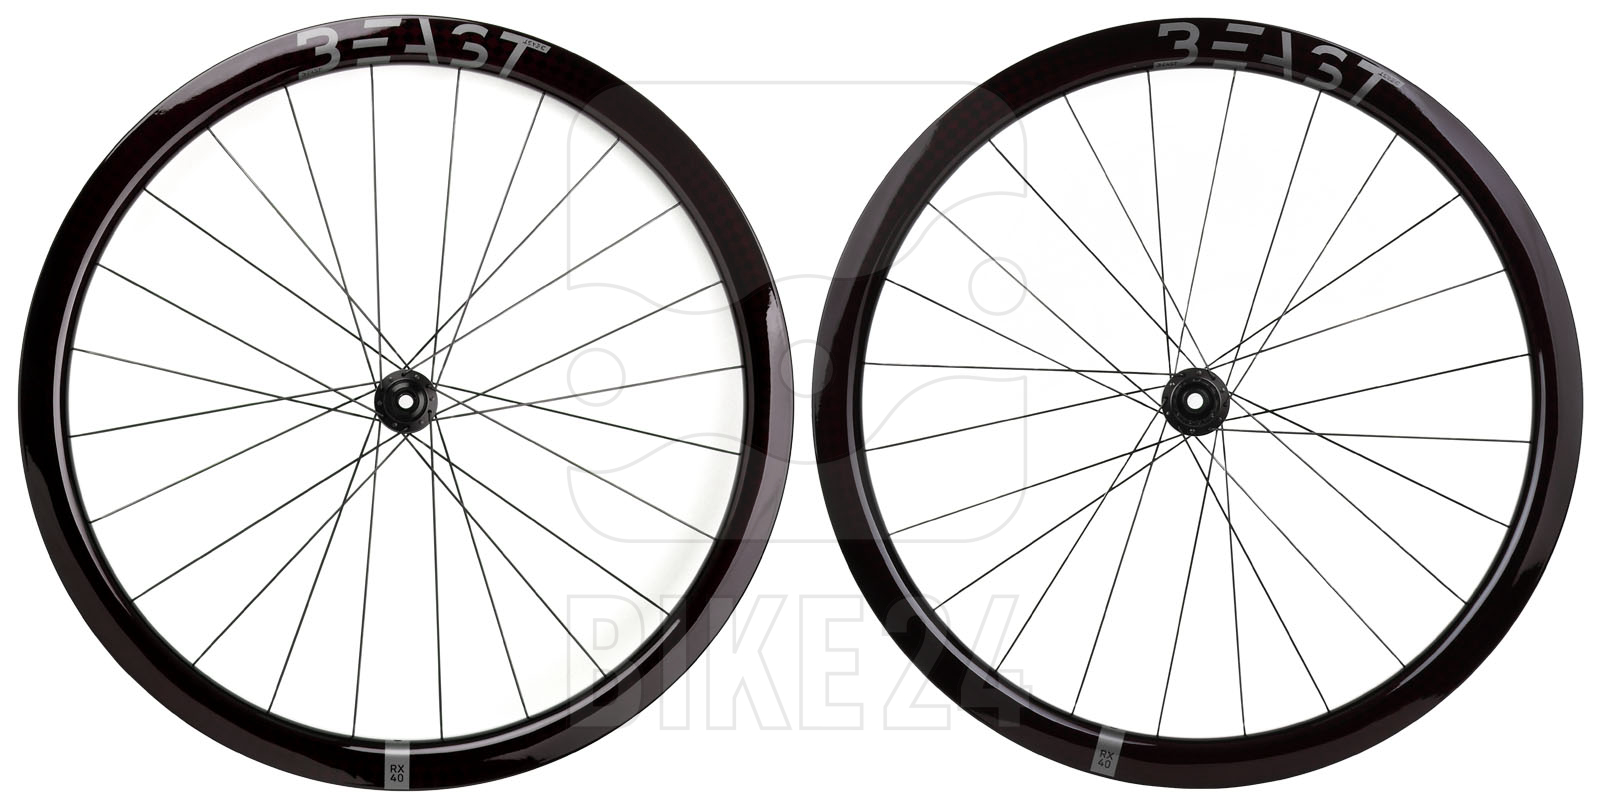 Image of Beast Components RX40 + DT Swiss 240 Carbon Wheelset - Center Lock - FW: 12x100mm | RW: 12x142mm - SQUARE red